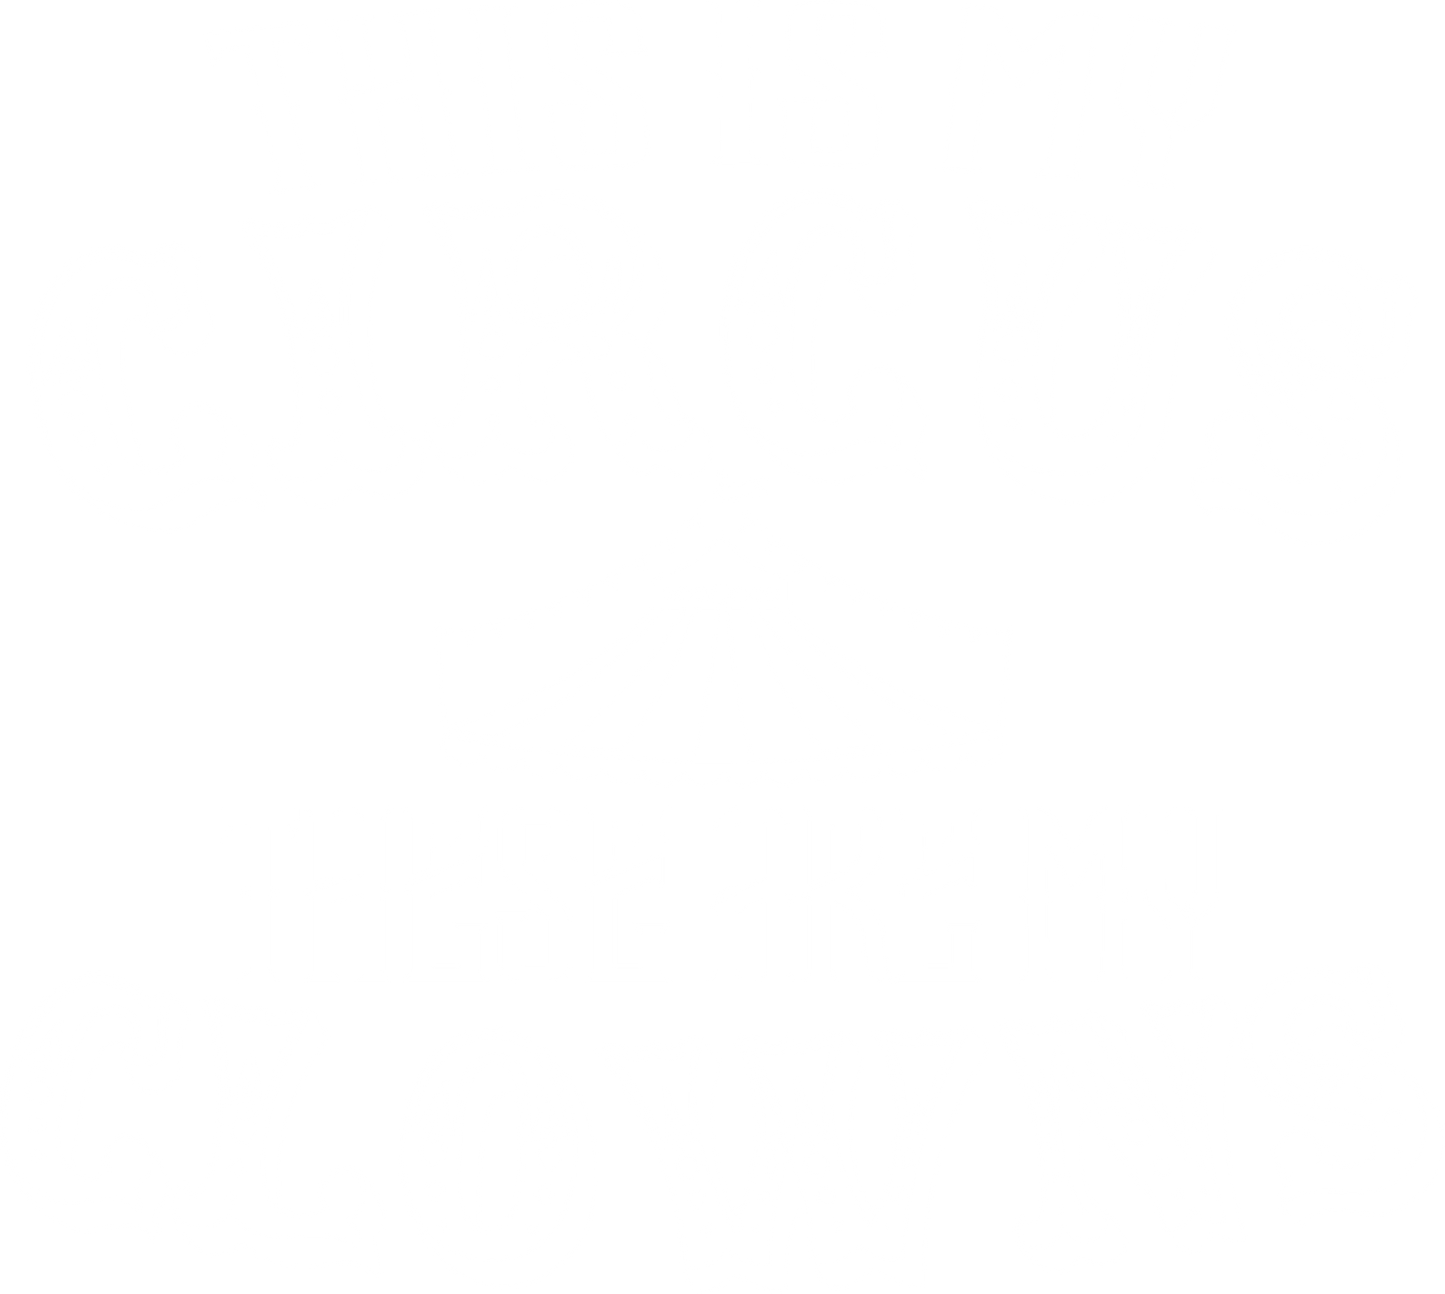 This is my Circus, These are my Clowns